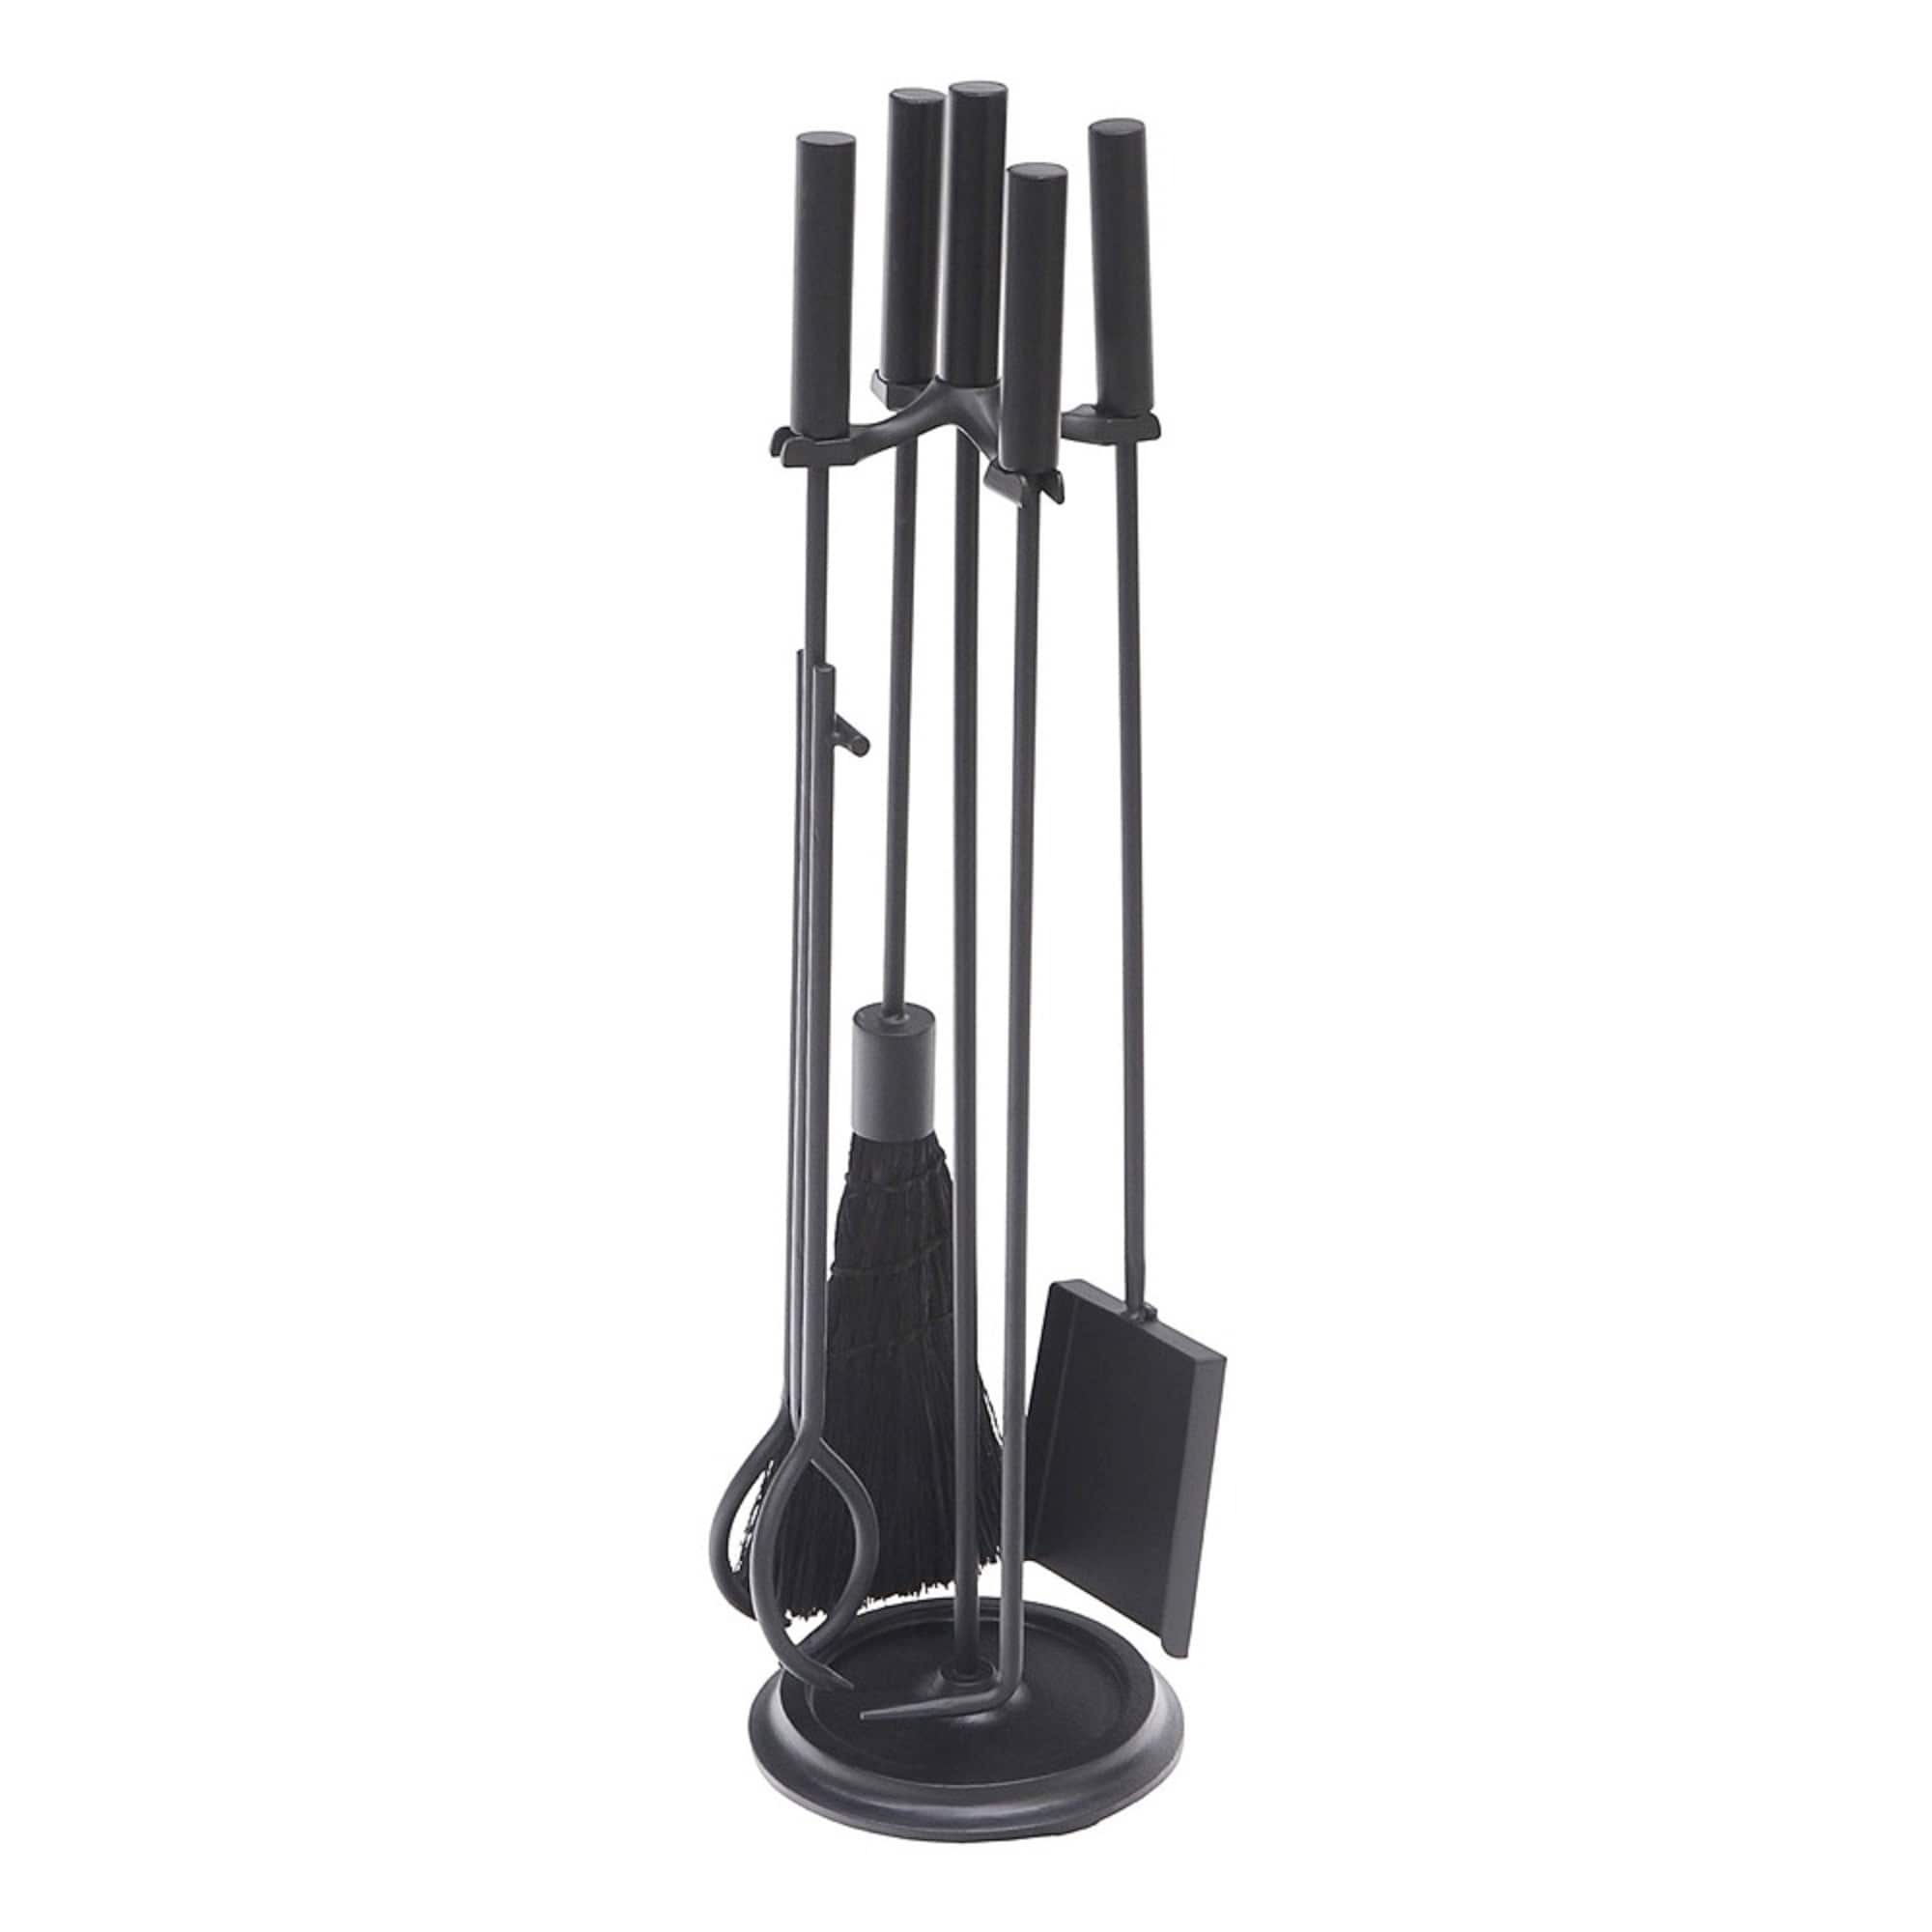 Minuteman International Contemporary Bedford Fireplace Set of 4 Tools, 30.25 Inch Tall, Black